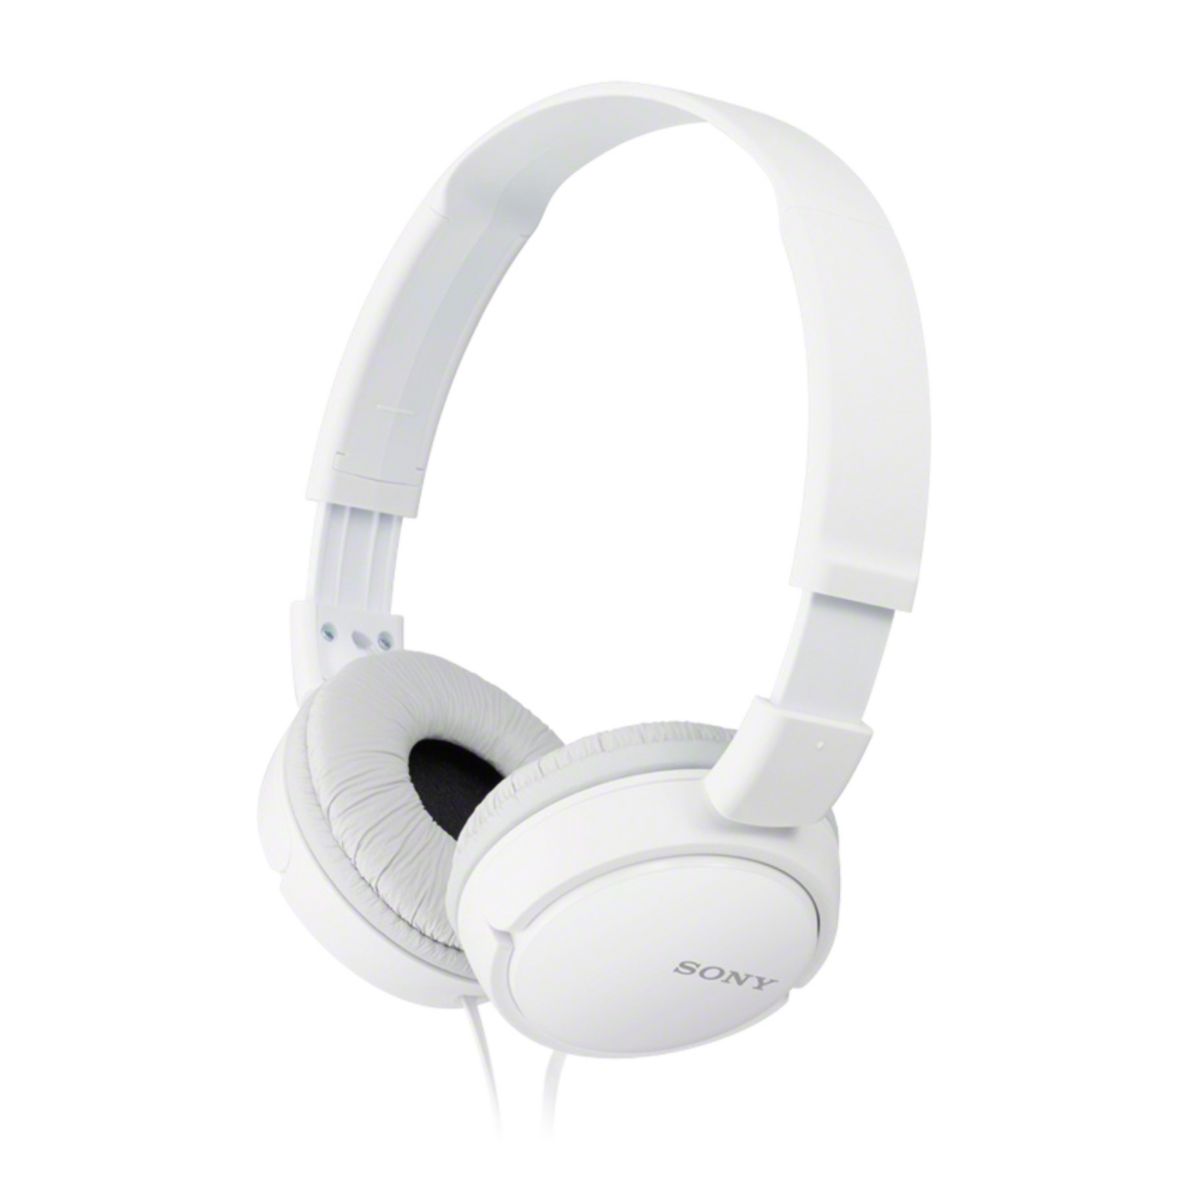 SONY Casque audio filaire - Blanc - MDR-ZX110AP